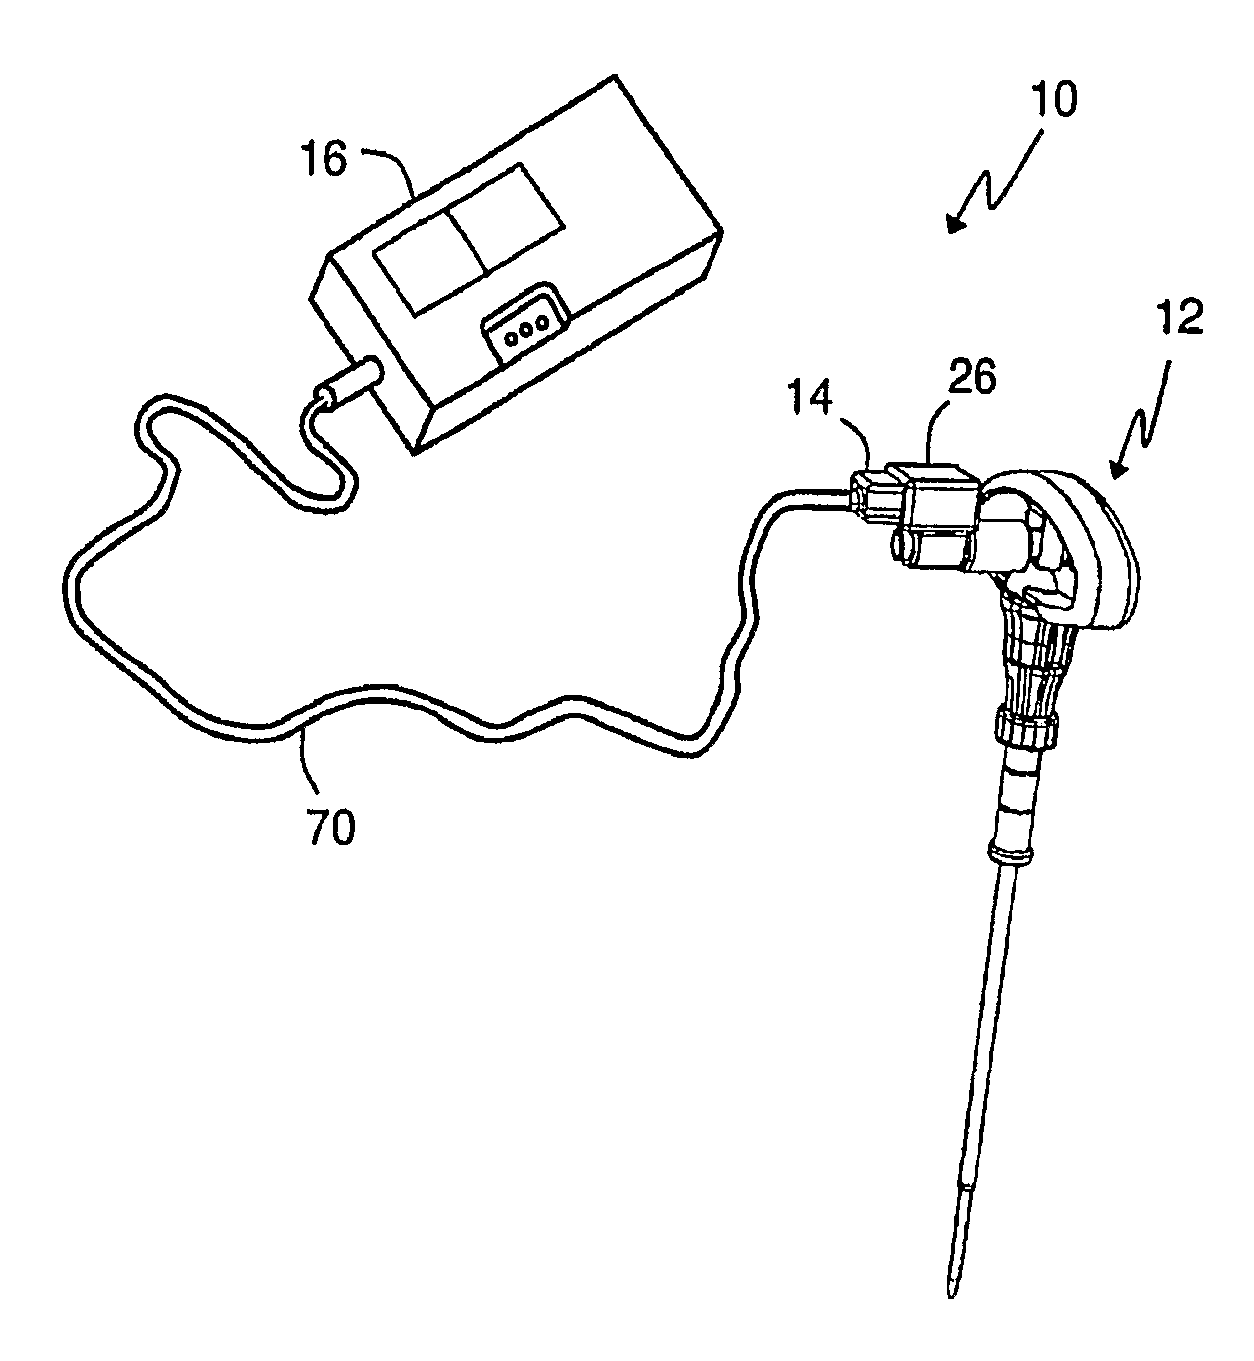 Surgical Trajectory Monitoring System and Related Methods